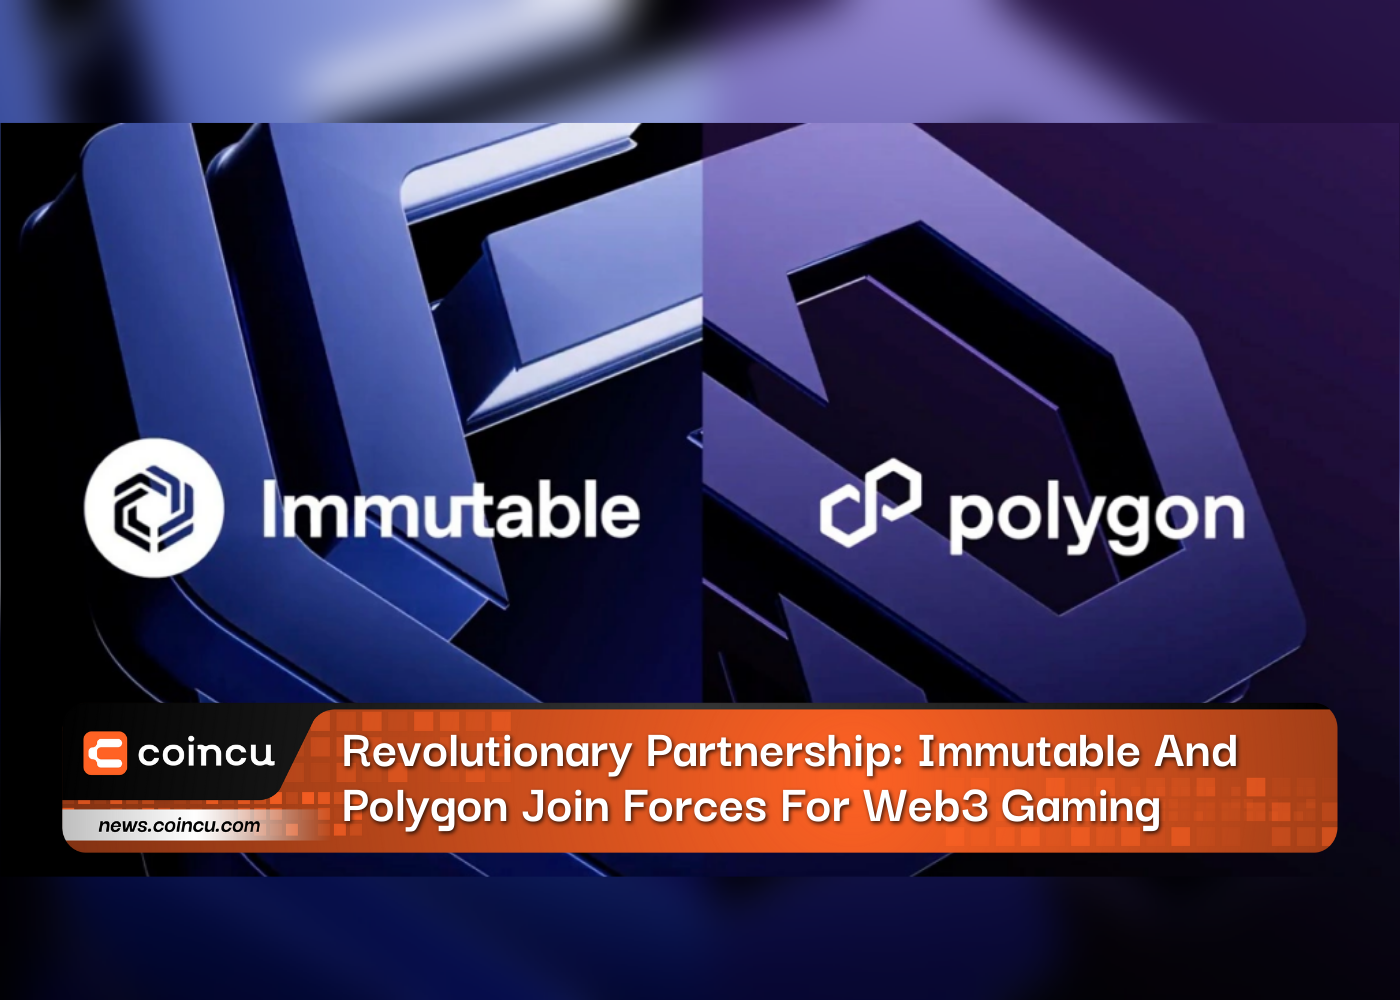 Revolutionary Partnership: Immutable And Polygon Join Forces For Web3 Gaming